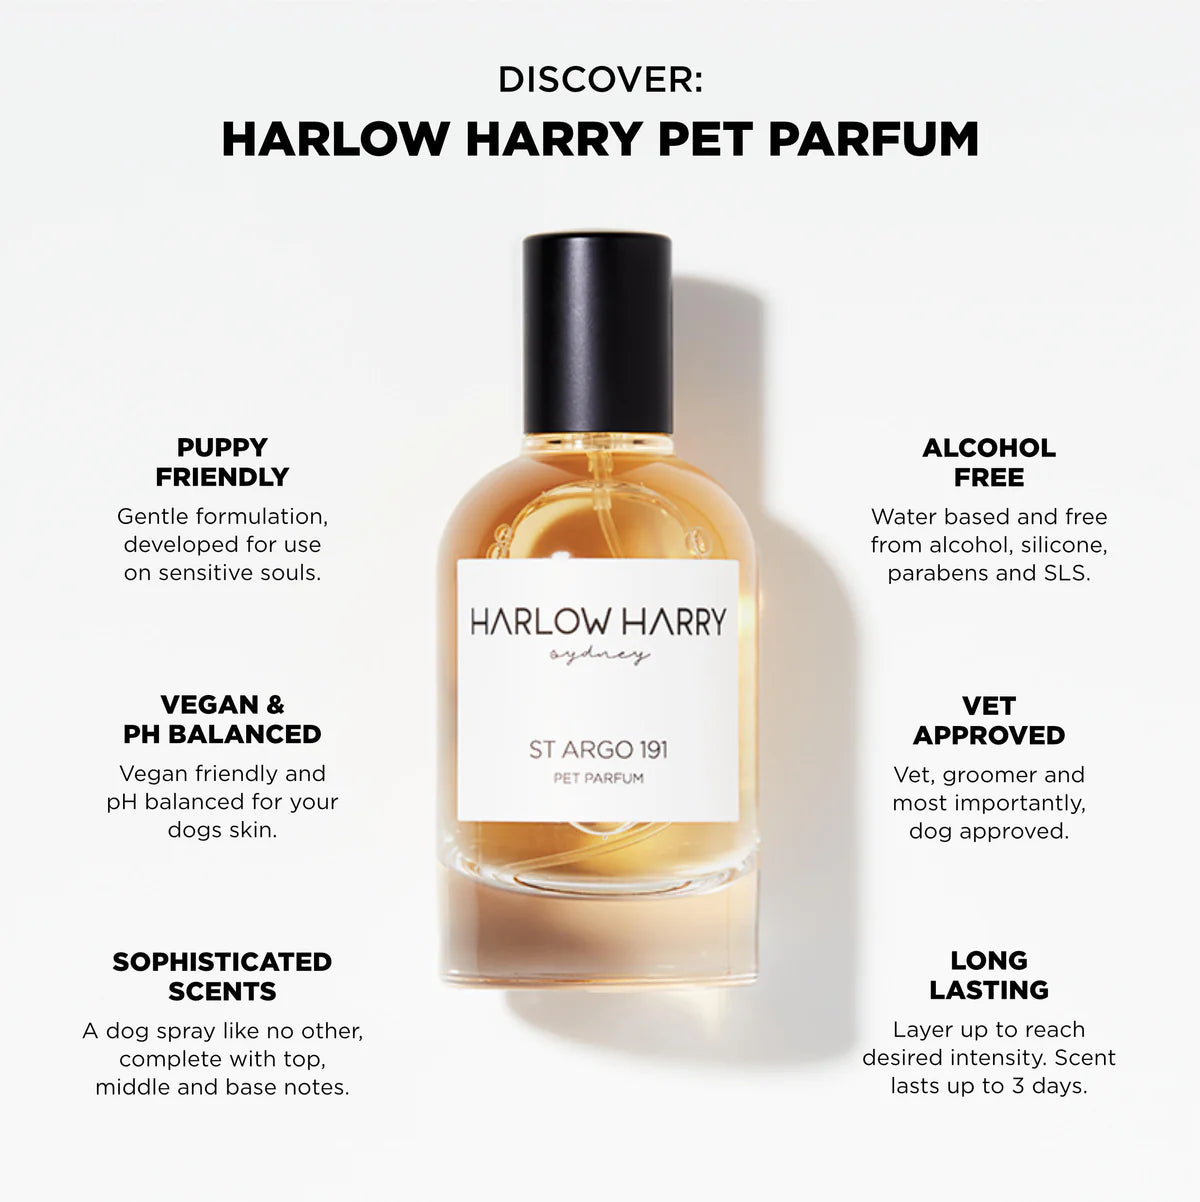 Elegant St Argo 191 dog perfume bottle for pets with a clear amber liquid, labeled 'Harlow Harry pet parfum,' surrounded by key selling points such as being friendly ph balanced, alcohol-free, vegan &